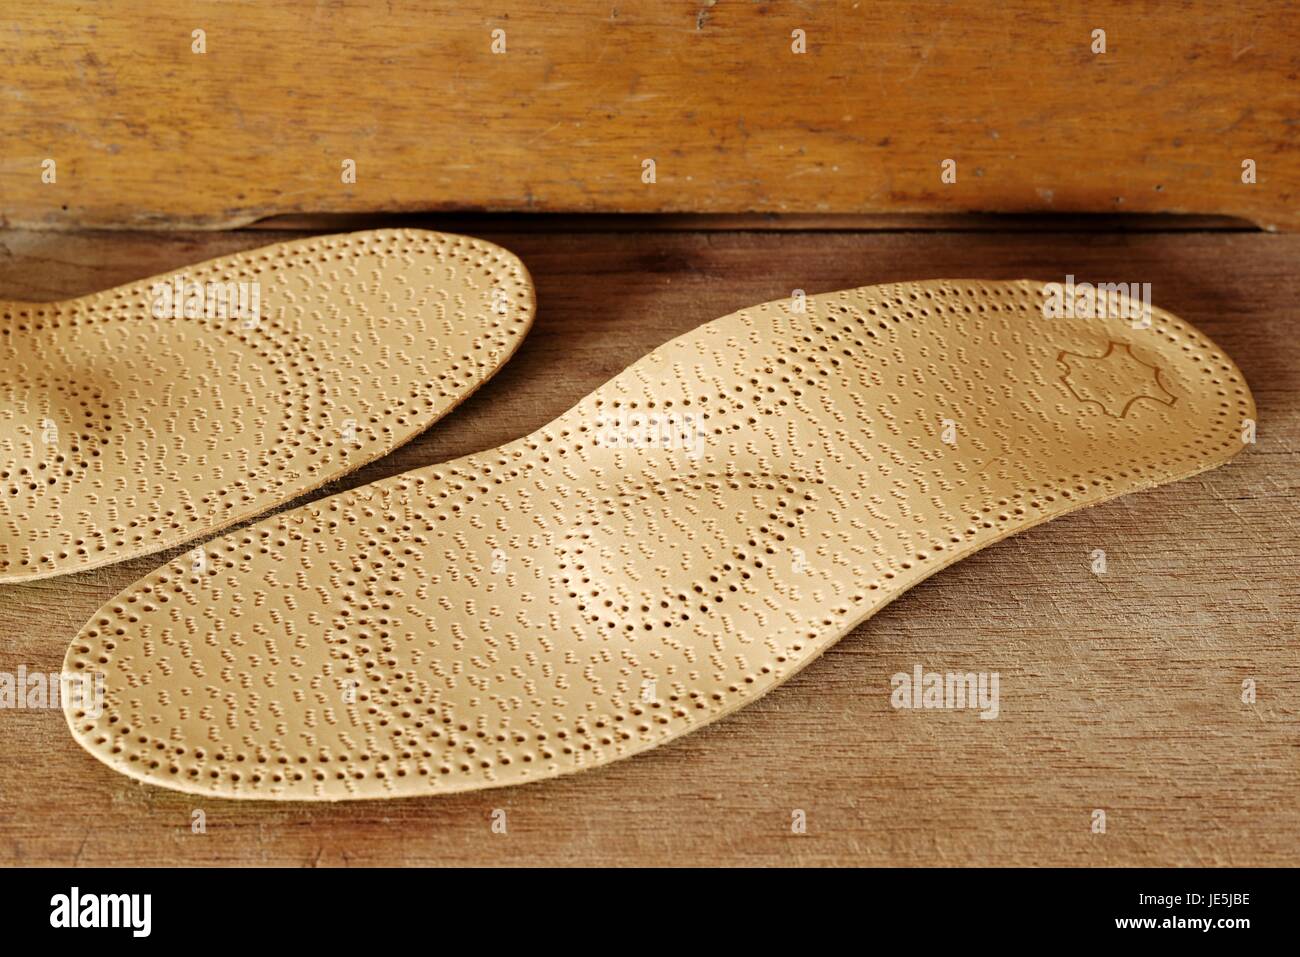 Orthopedic arch support made from leather on a wooden ground Stock Photo